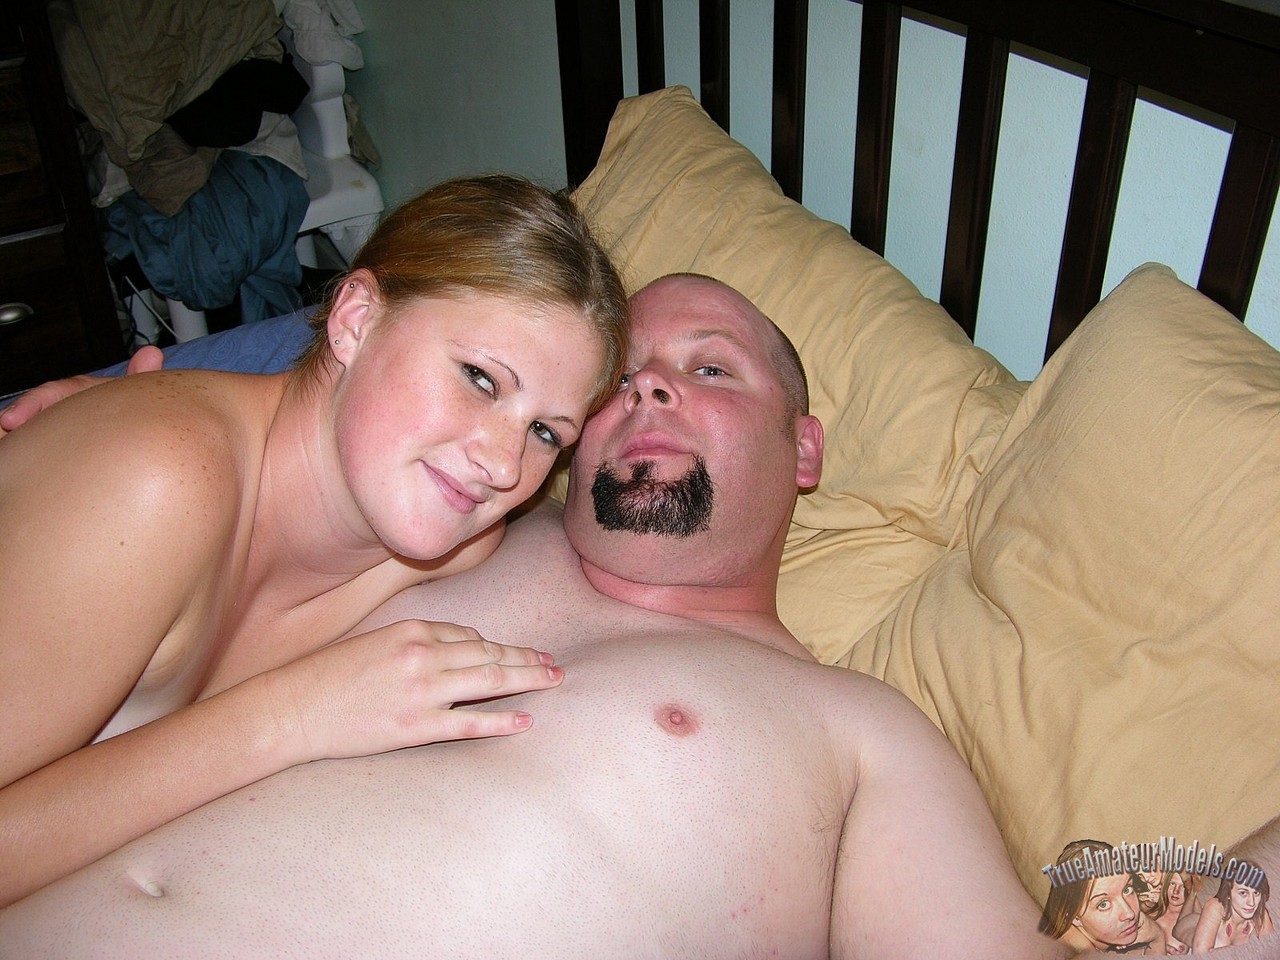 Strawberry Blonde Amateur With A Shaved Pussy Sucks Of A Bald Dude